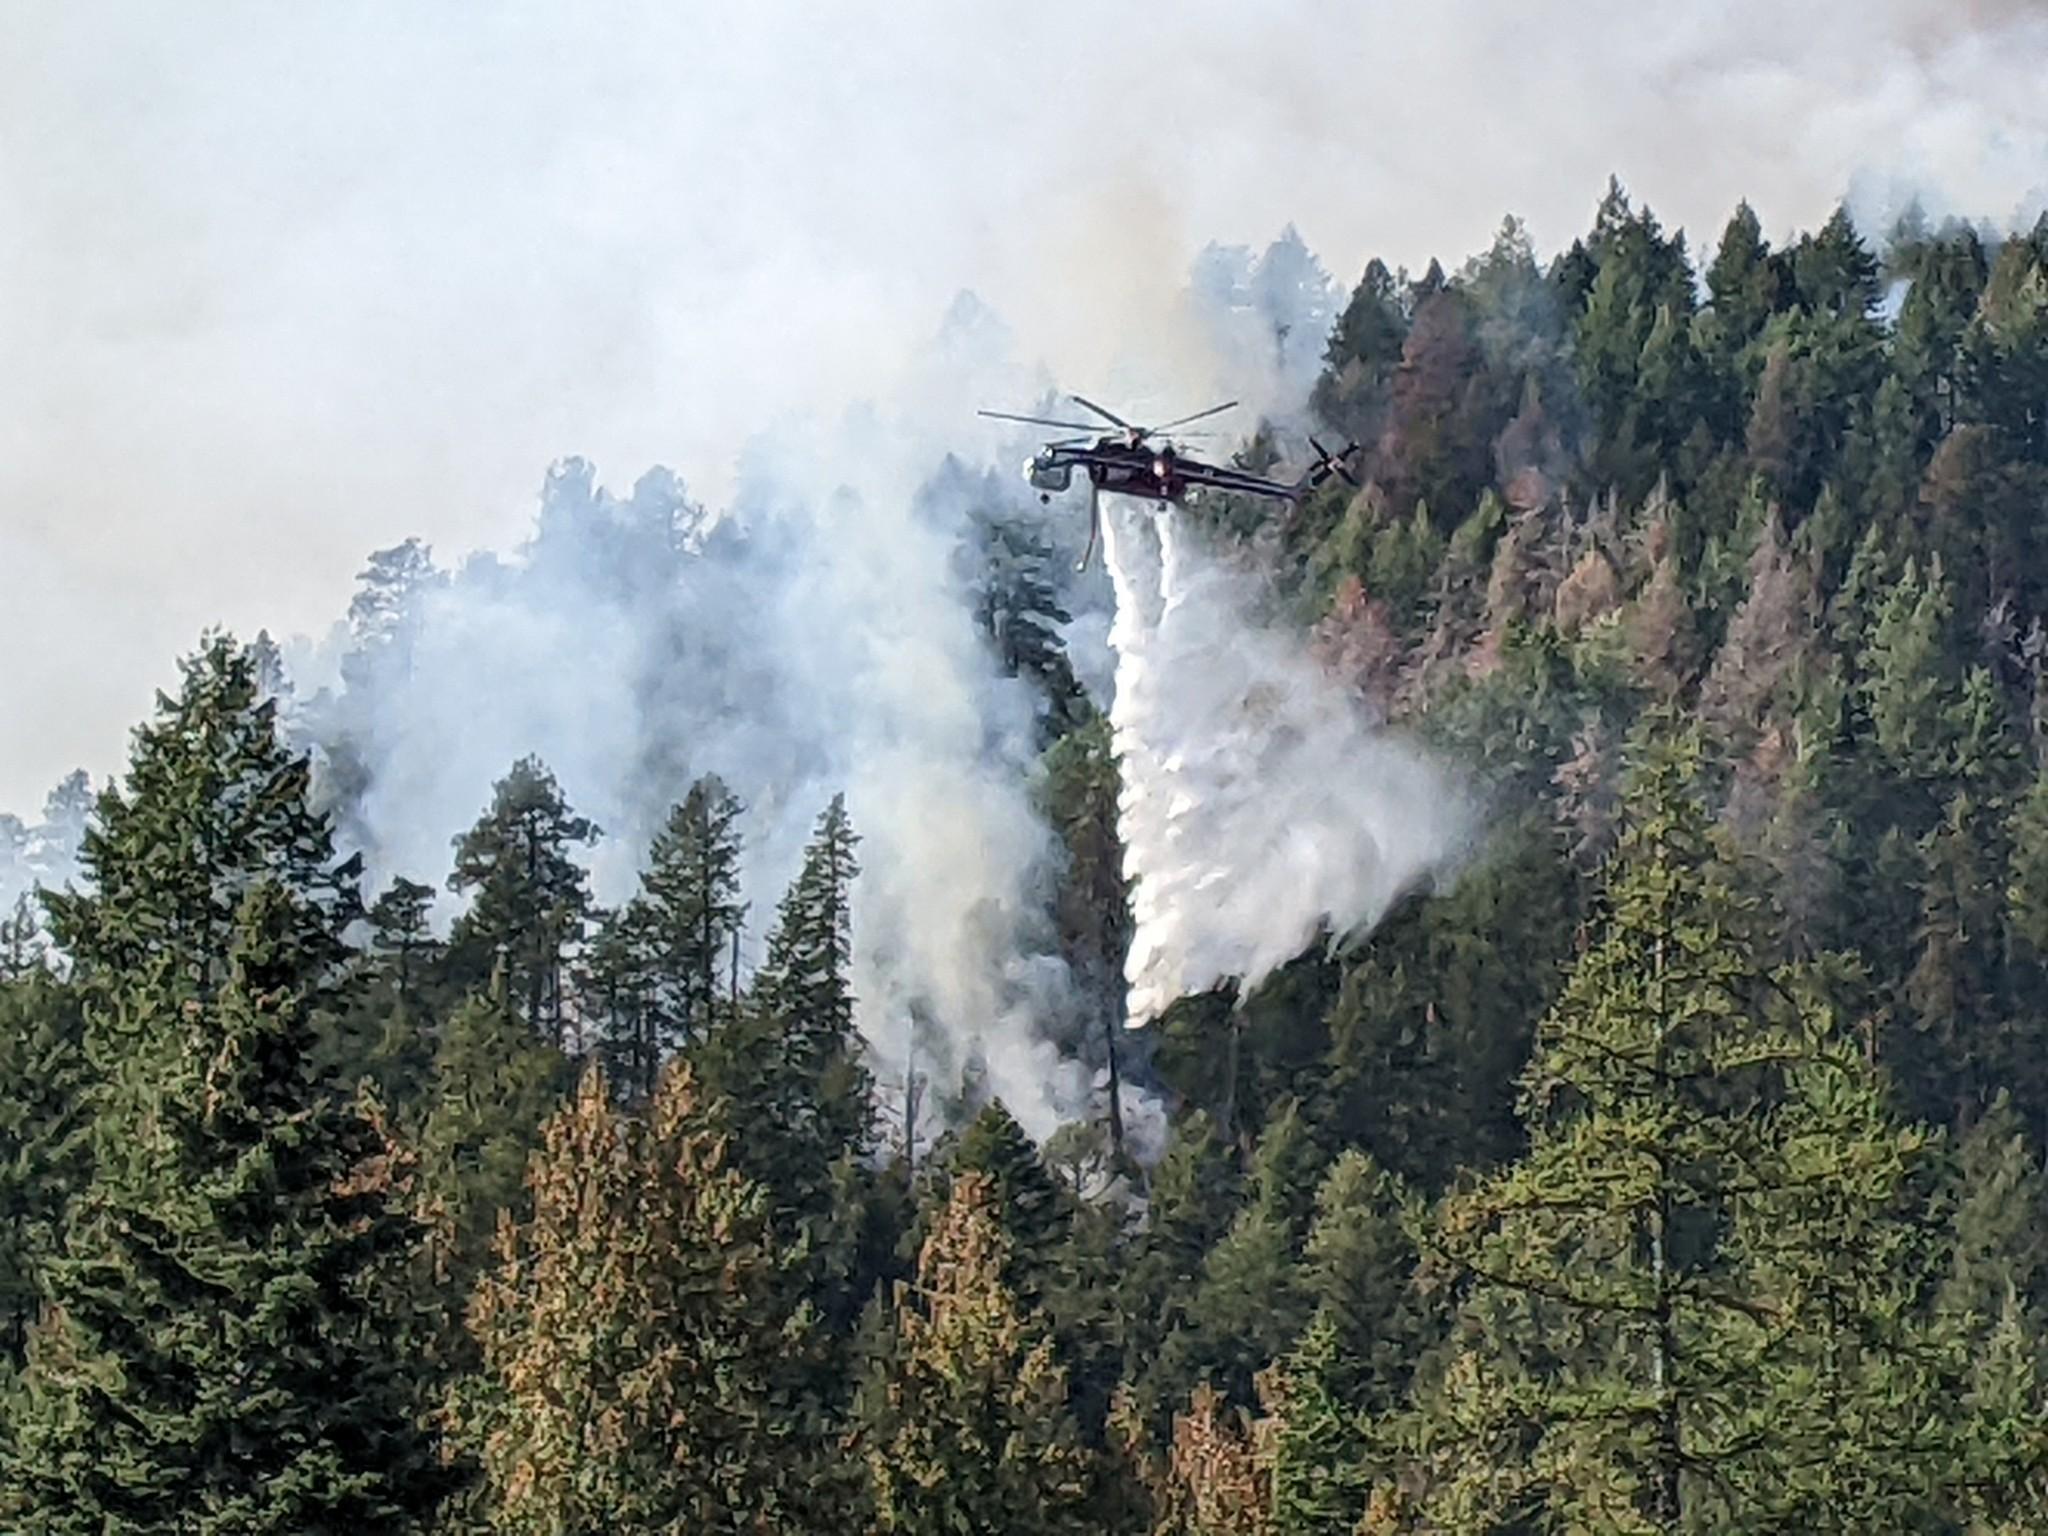 Fire officials reported some increased fire activity along Westside Road near Trout Creek Road prompting a few water drops using a heavy helicopter to knock down the fire's intensity